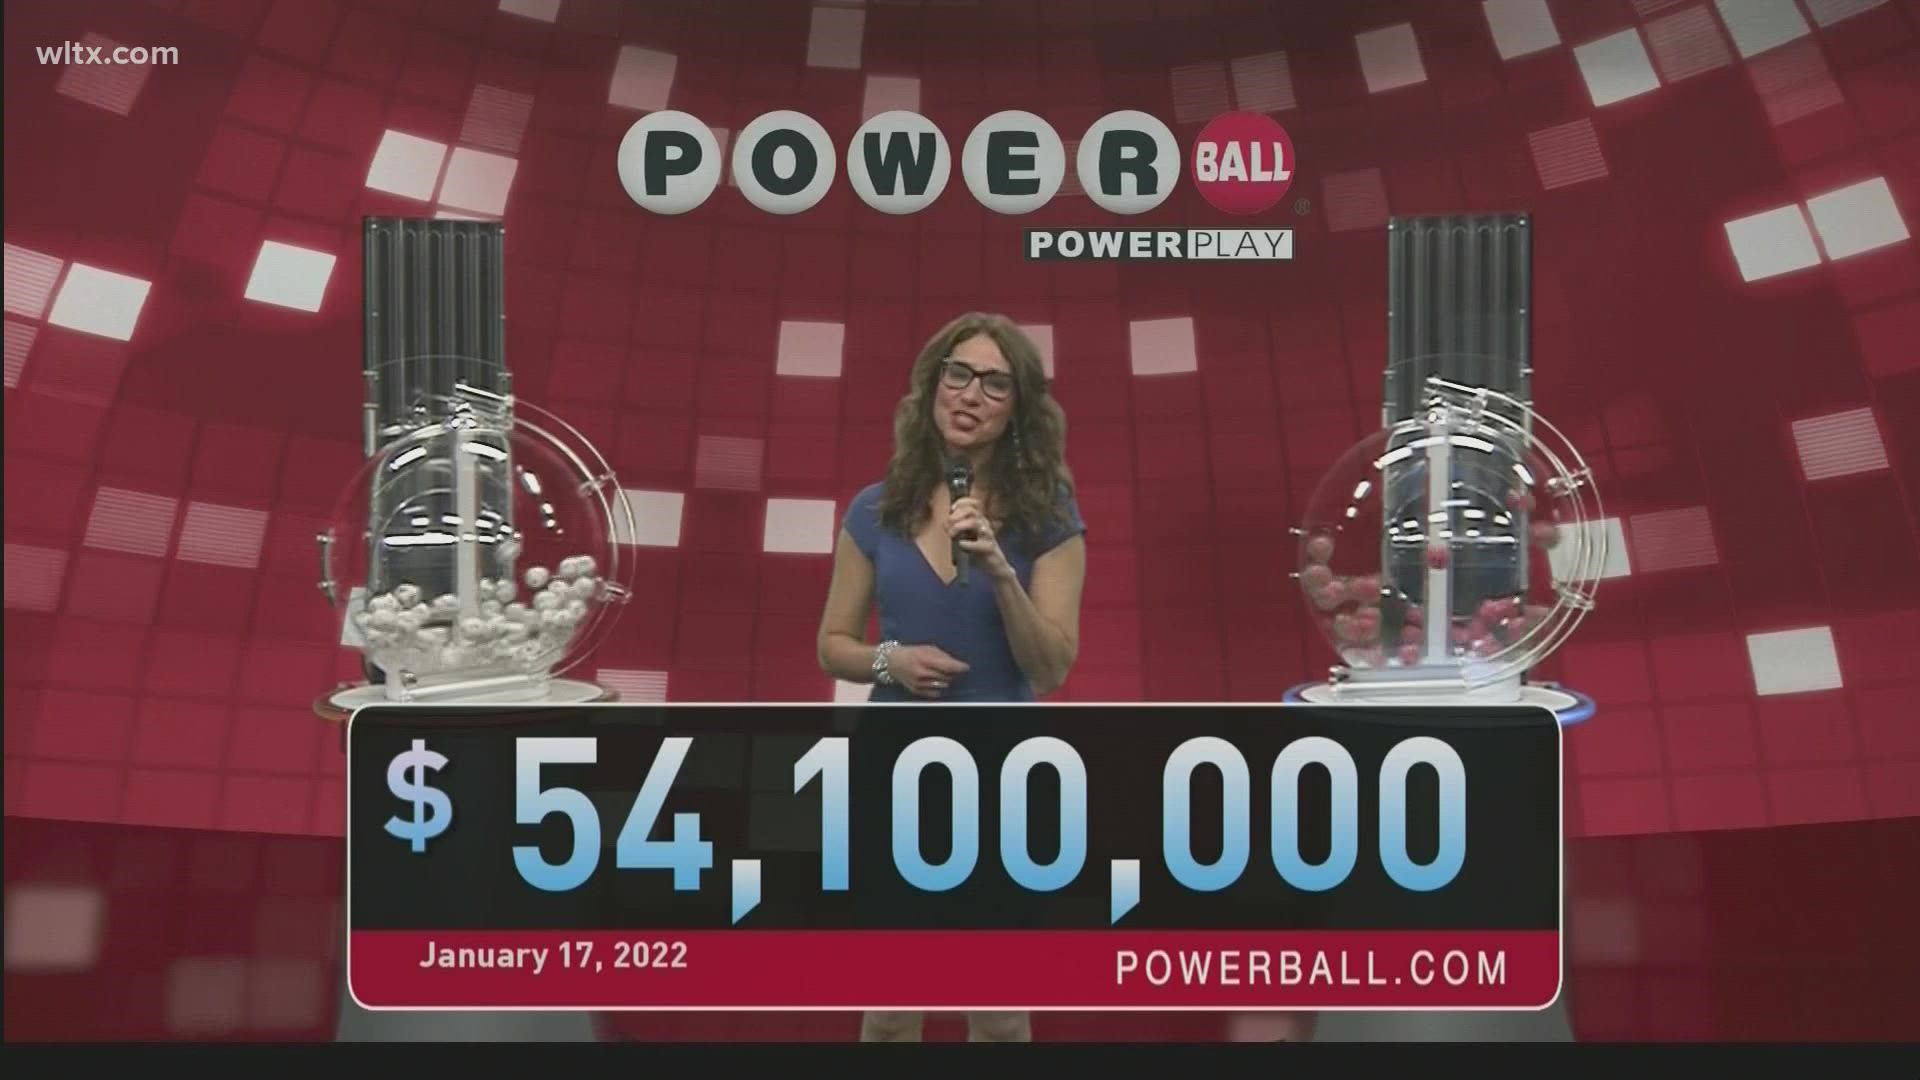 Here are the winning Powerball numbers for Monday, January 17, 2022.